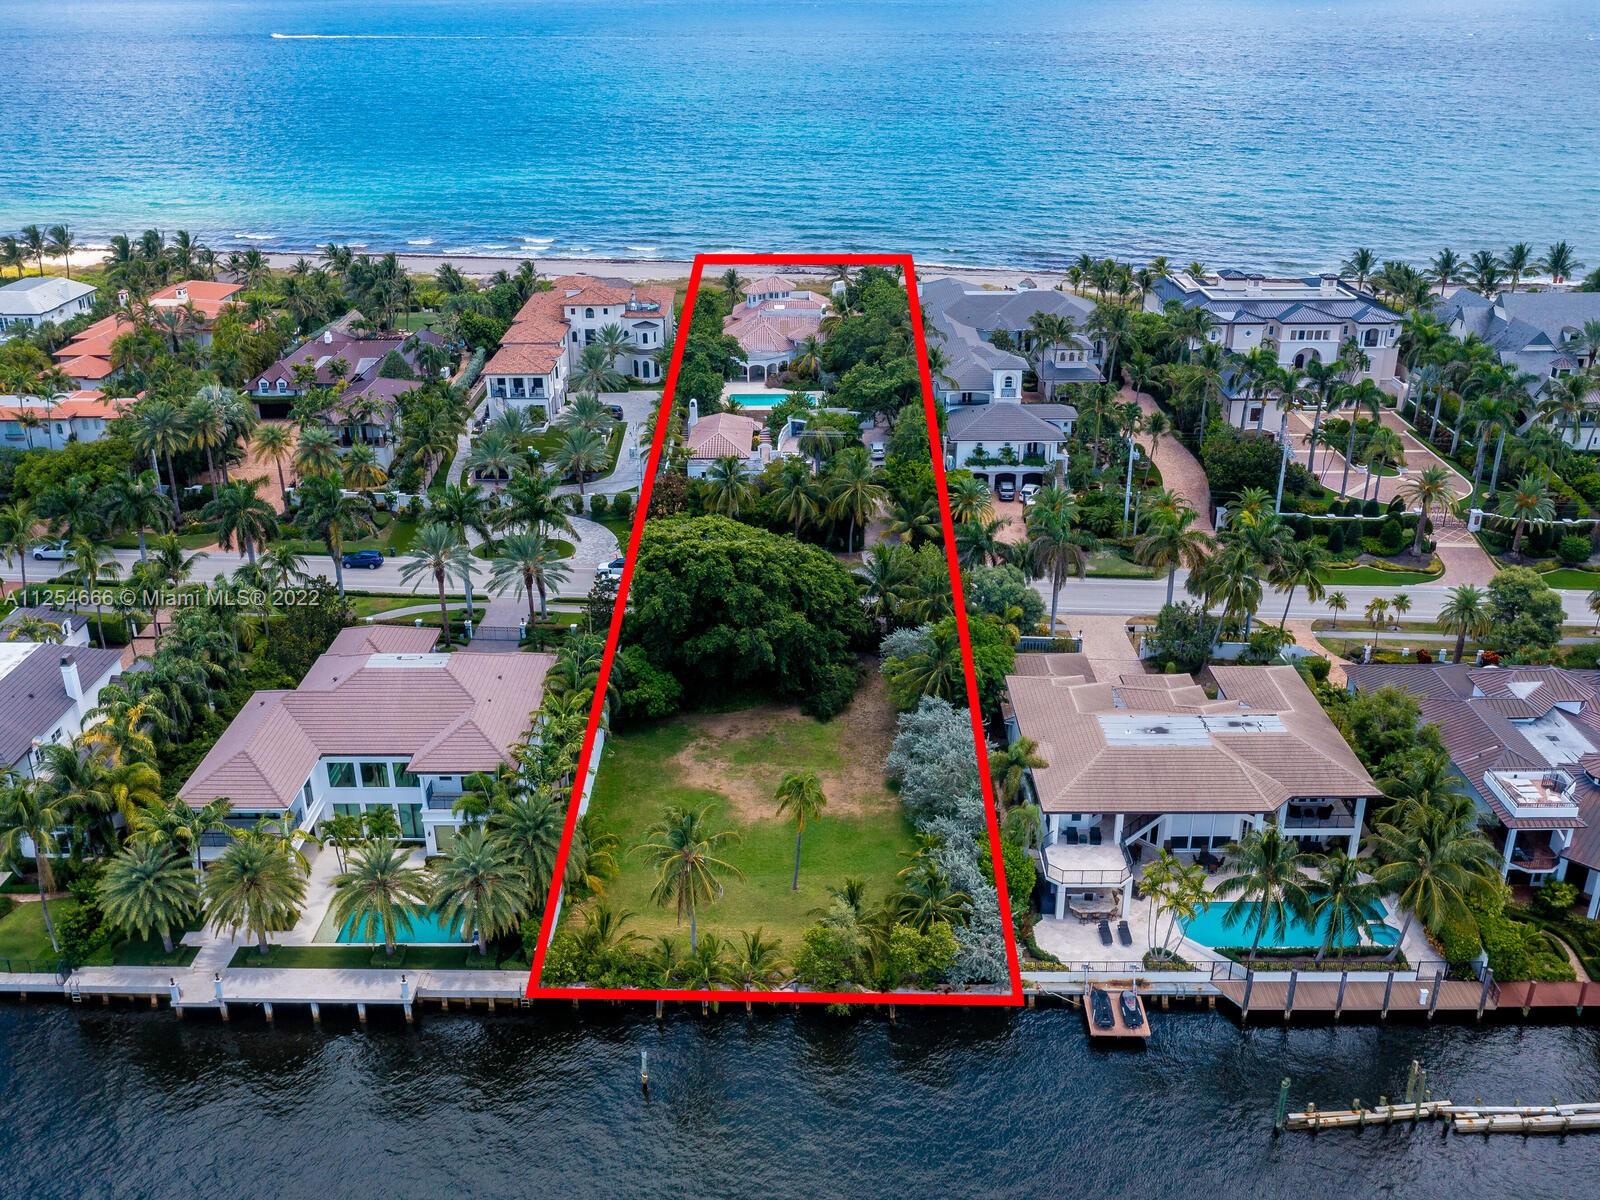 Magnificent Mansion in the heart of Highland Florida, your home, your joy, your place to enjoy. Live in or Tear down and build on this magnificent 57,835 sqft Open Bay Waterfront and Oceanfront lot. Breathtaking areas all around, Beach access, 100ft canal access, high ceilings, bbq area, pool area, pleasant community, a dream in place. Unique property connecting both sides of street within one folio.